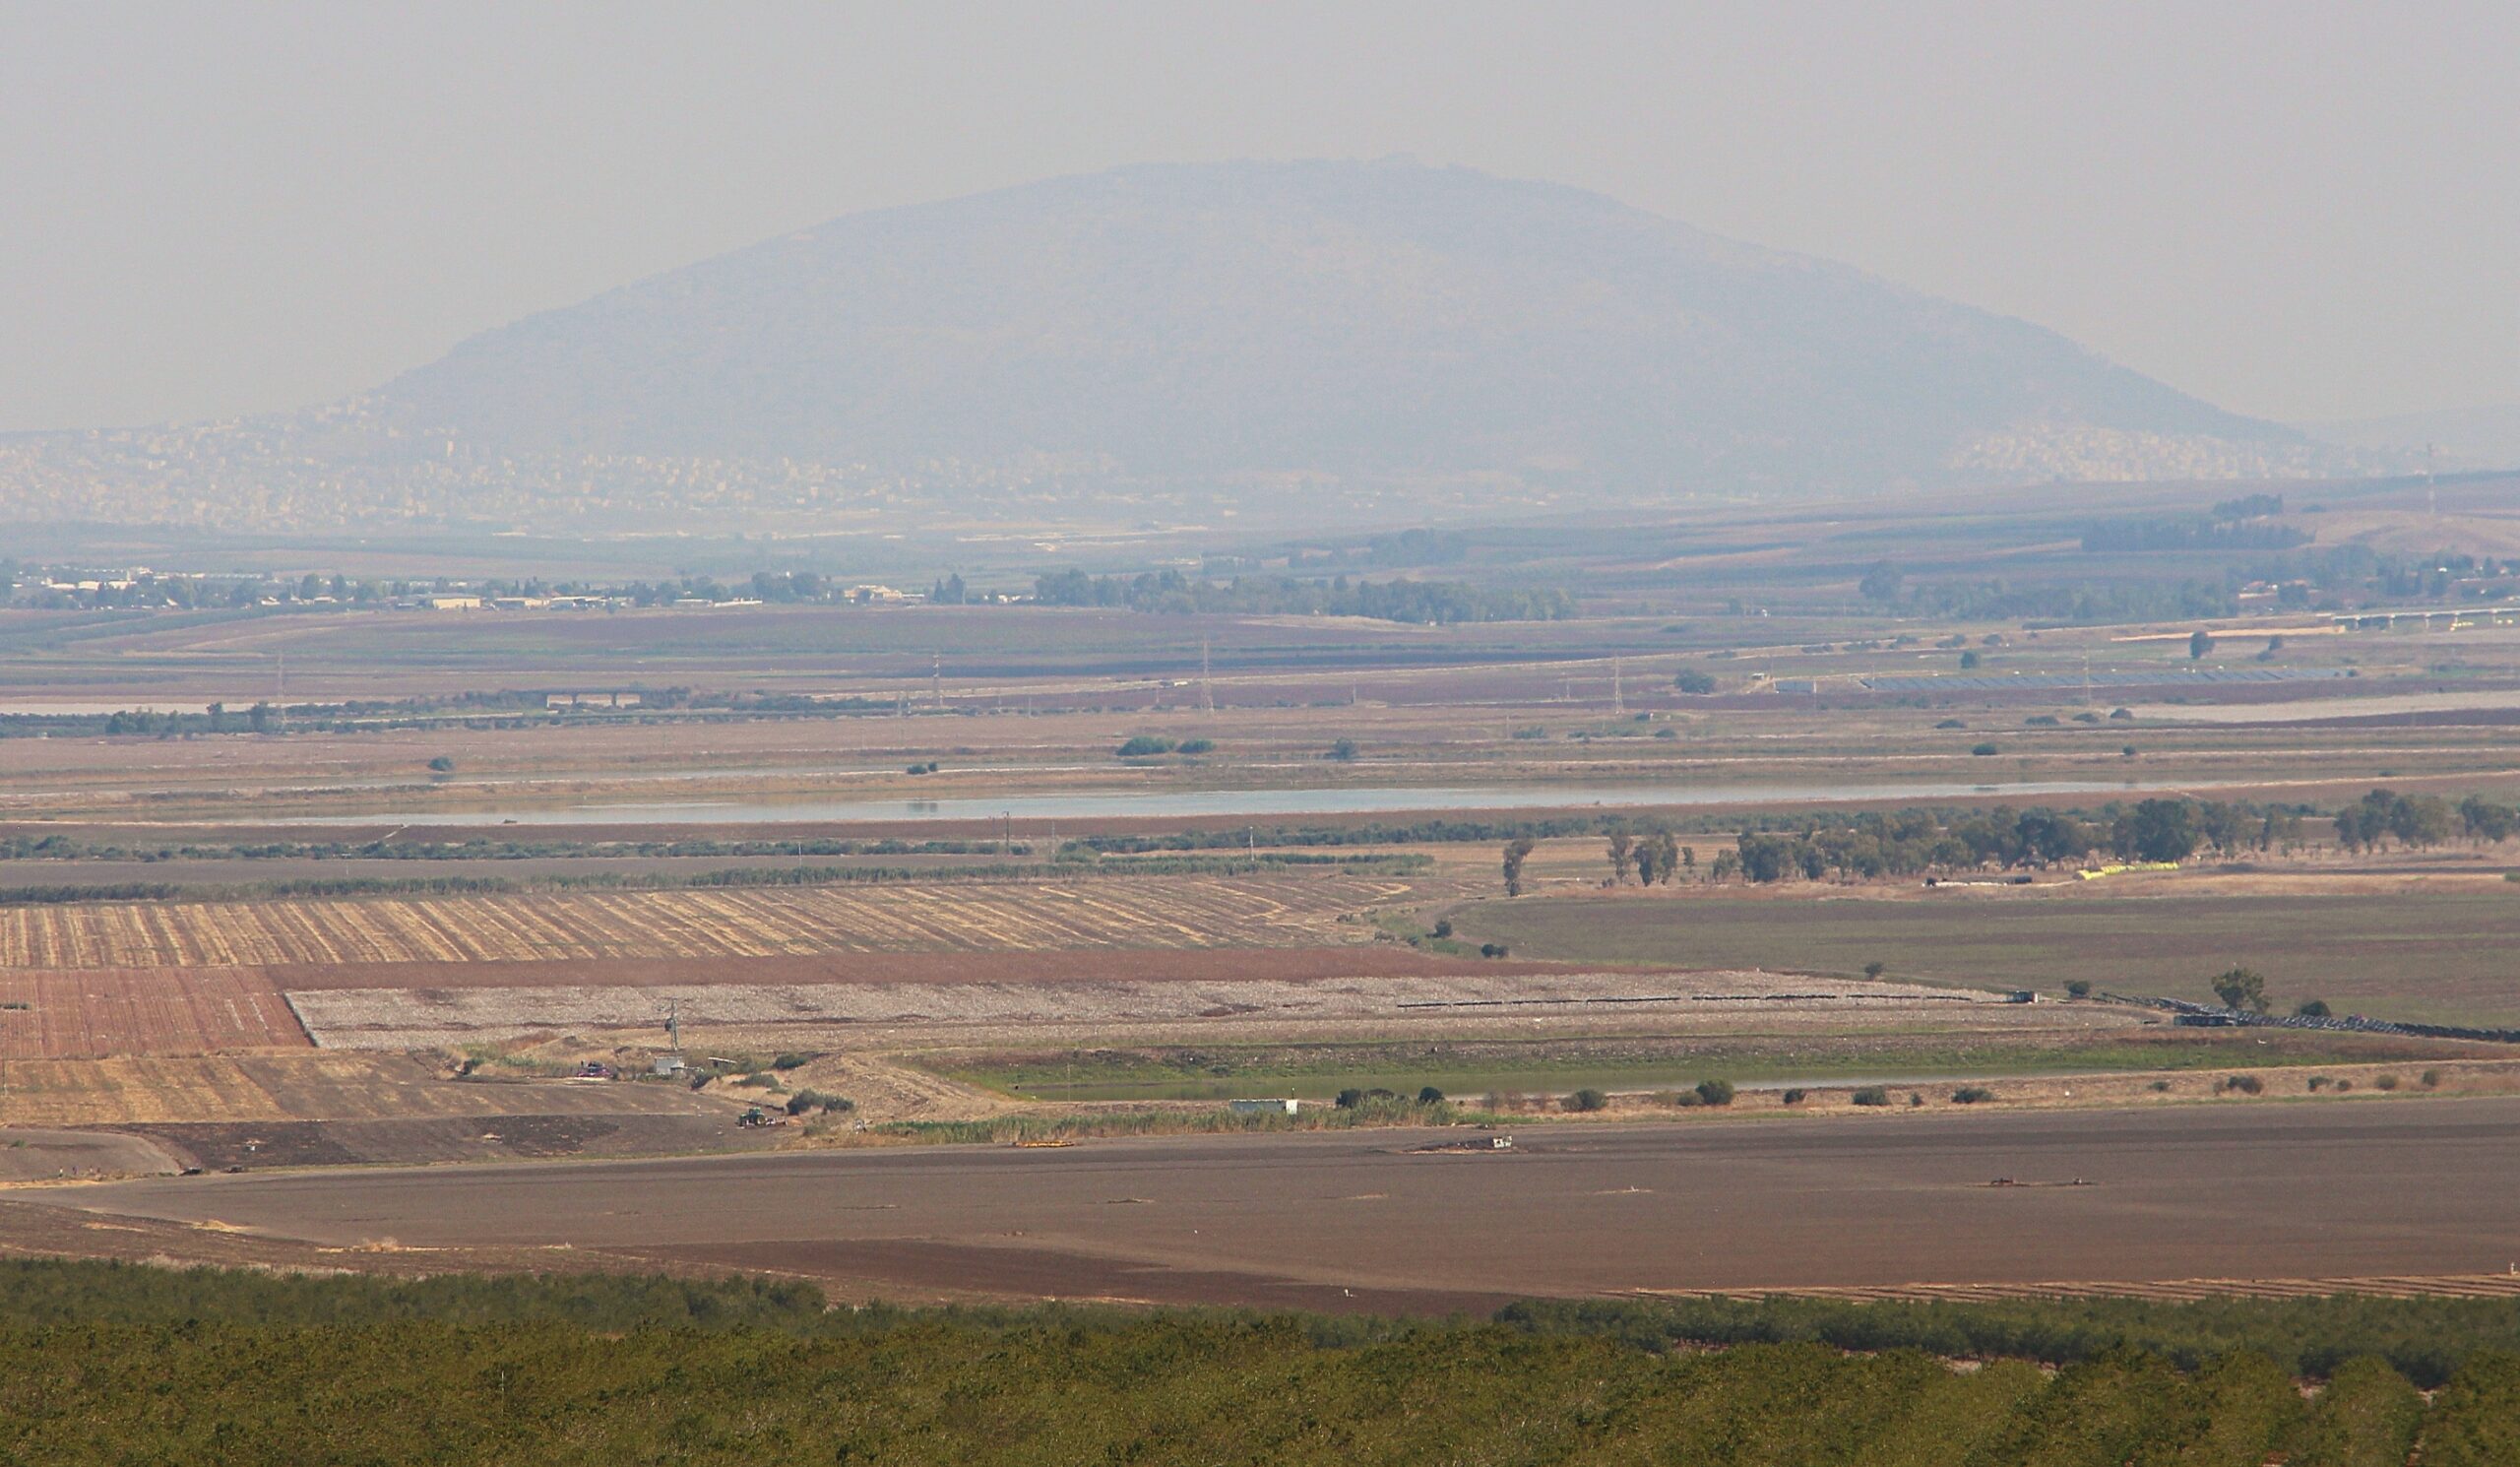 Mt. Tabor: Prophetess Deborah defeats the Canaanites, and A Possible Site For The Lord’s Transfiguration